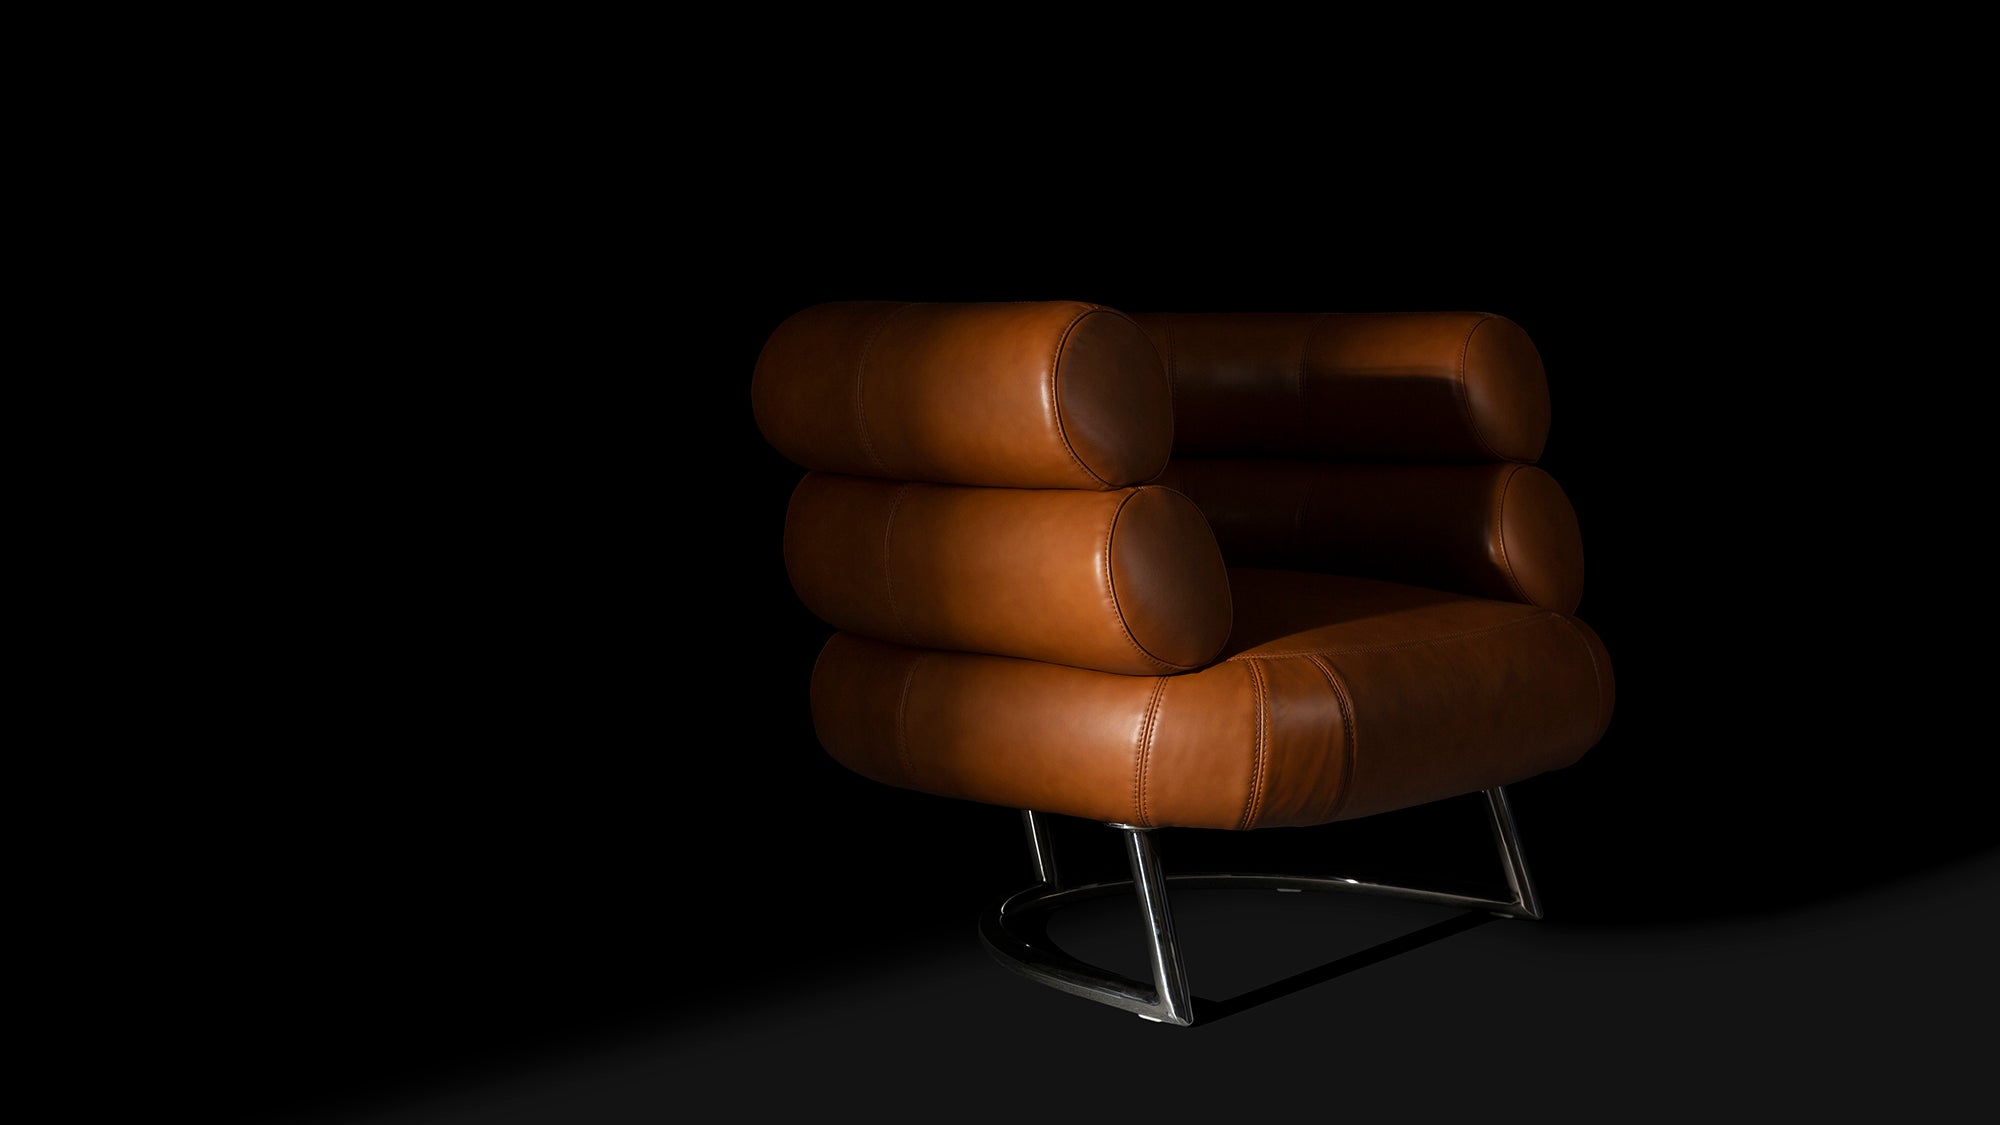 Front angled view of the tan leather Eileen Gray Bibendum Chair on a black background